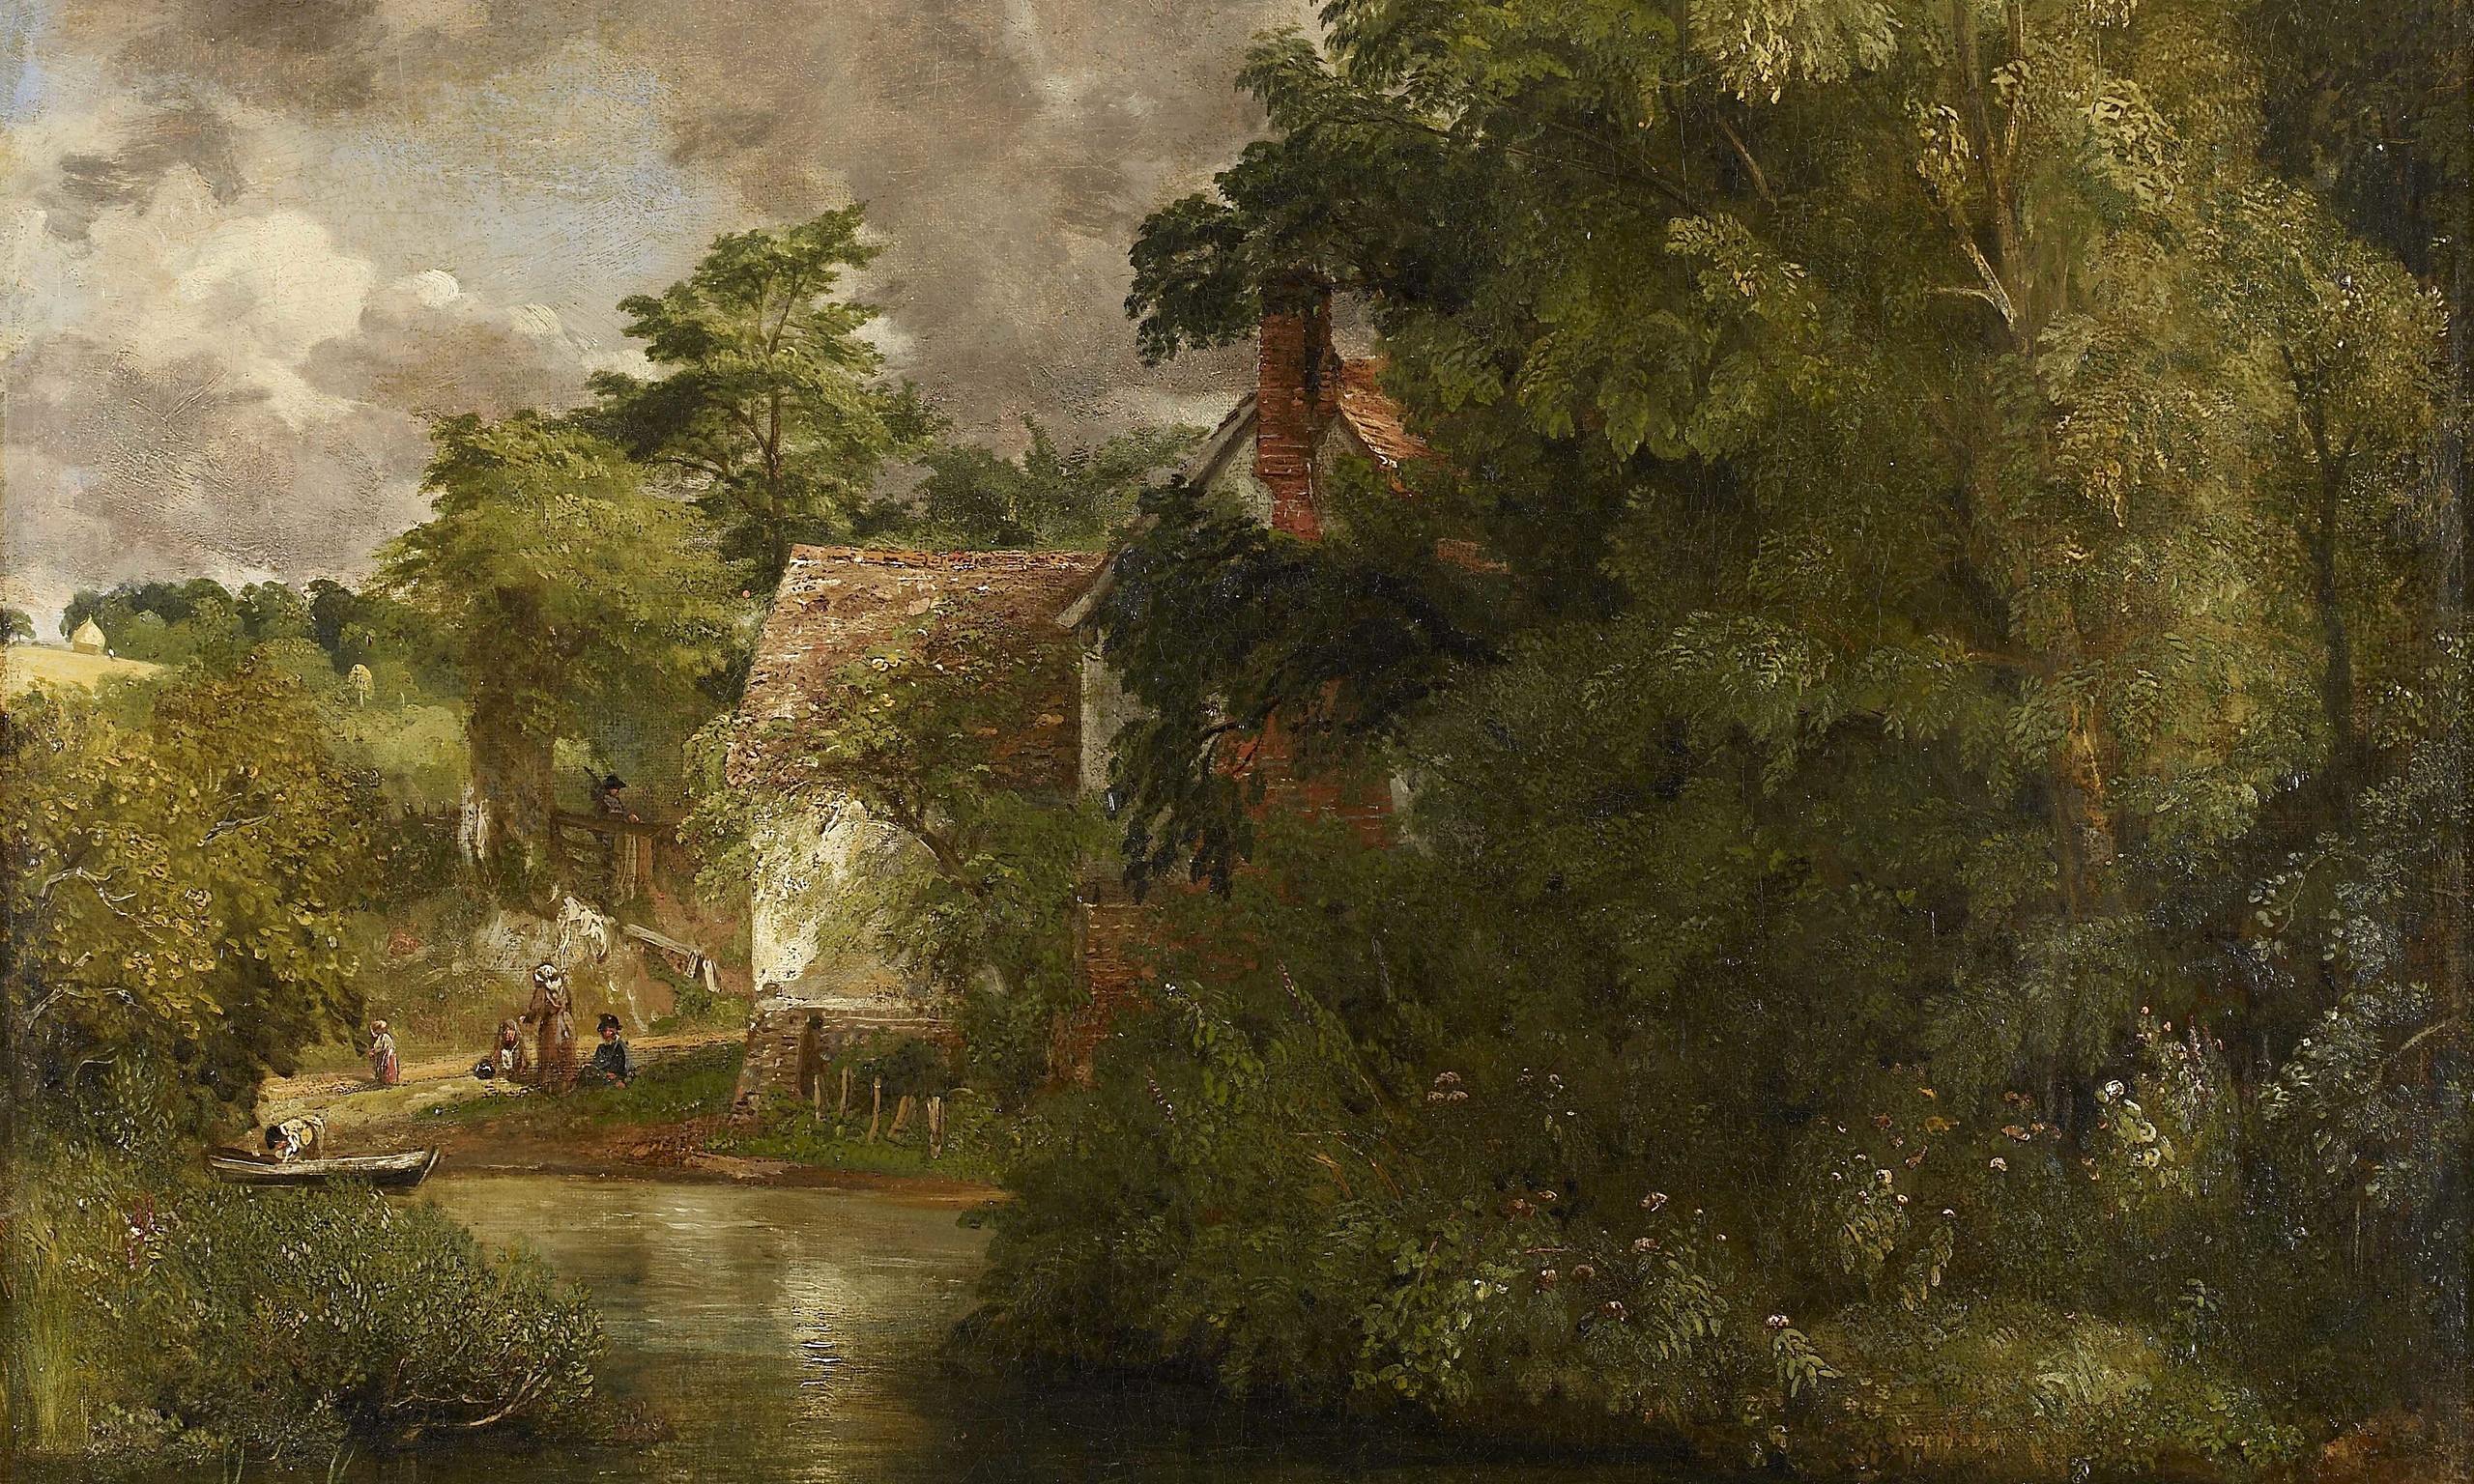 John Constable painting transferred to public ownership in lieu of £1m